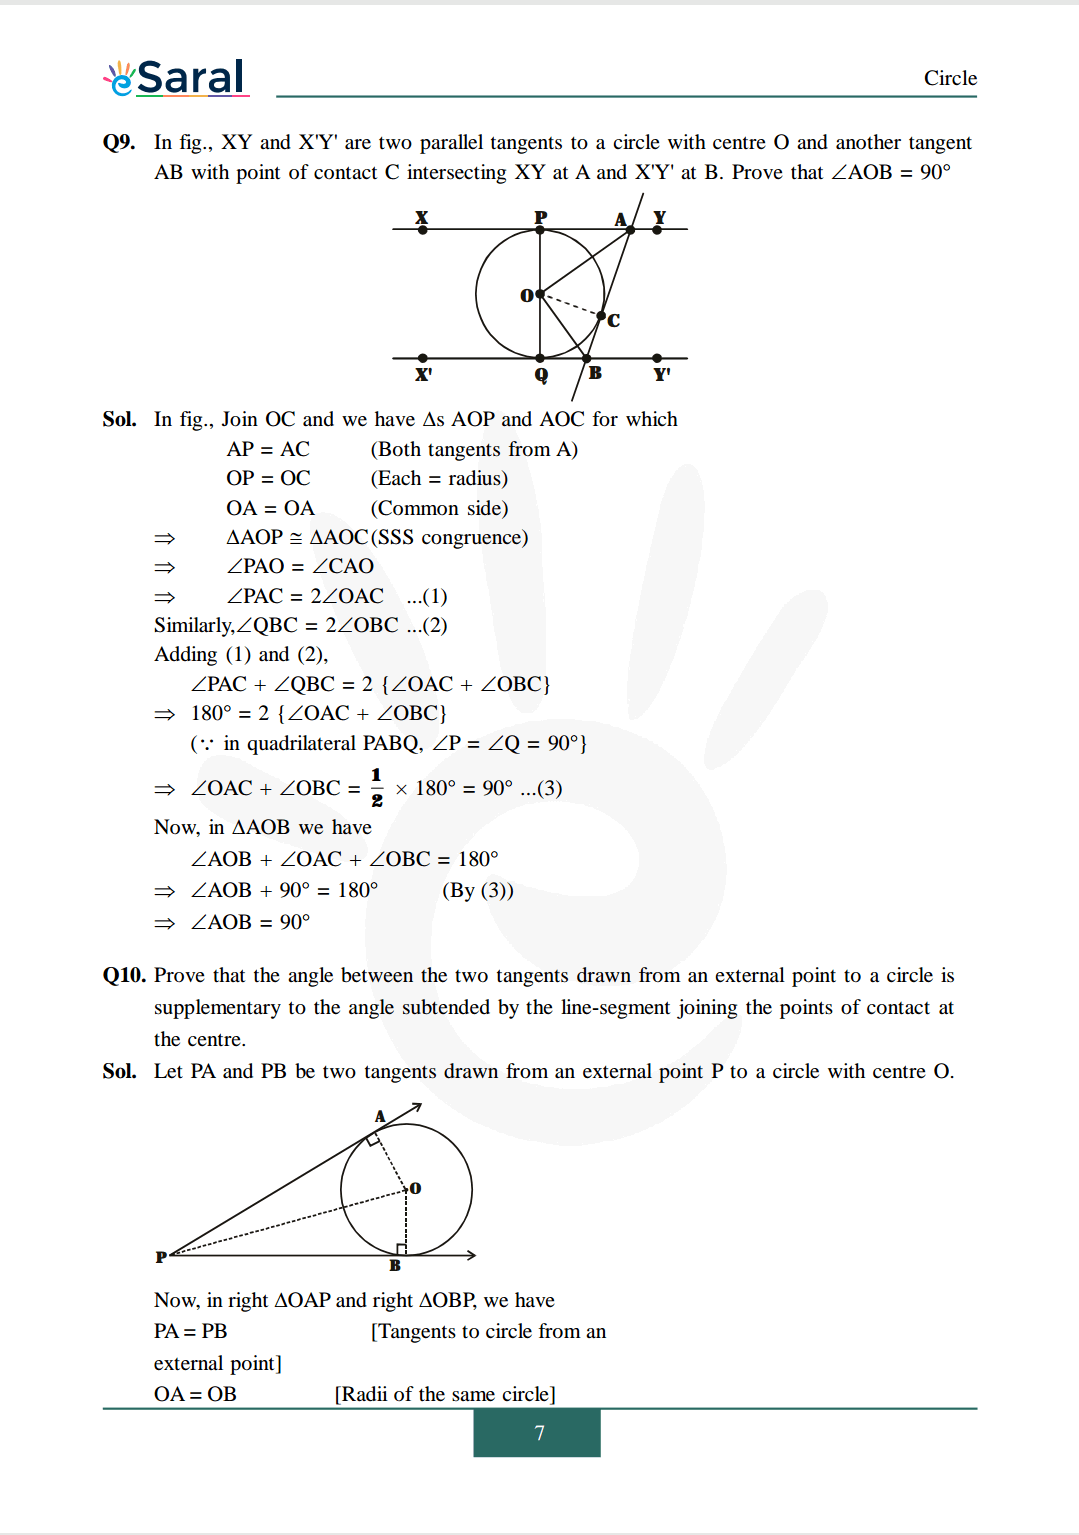 Class 10 Maths Chapter 10 exercise 10.2 solutions Image 7